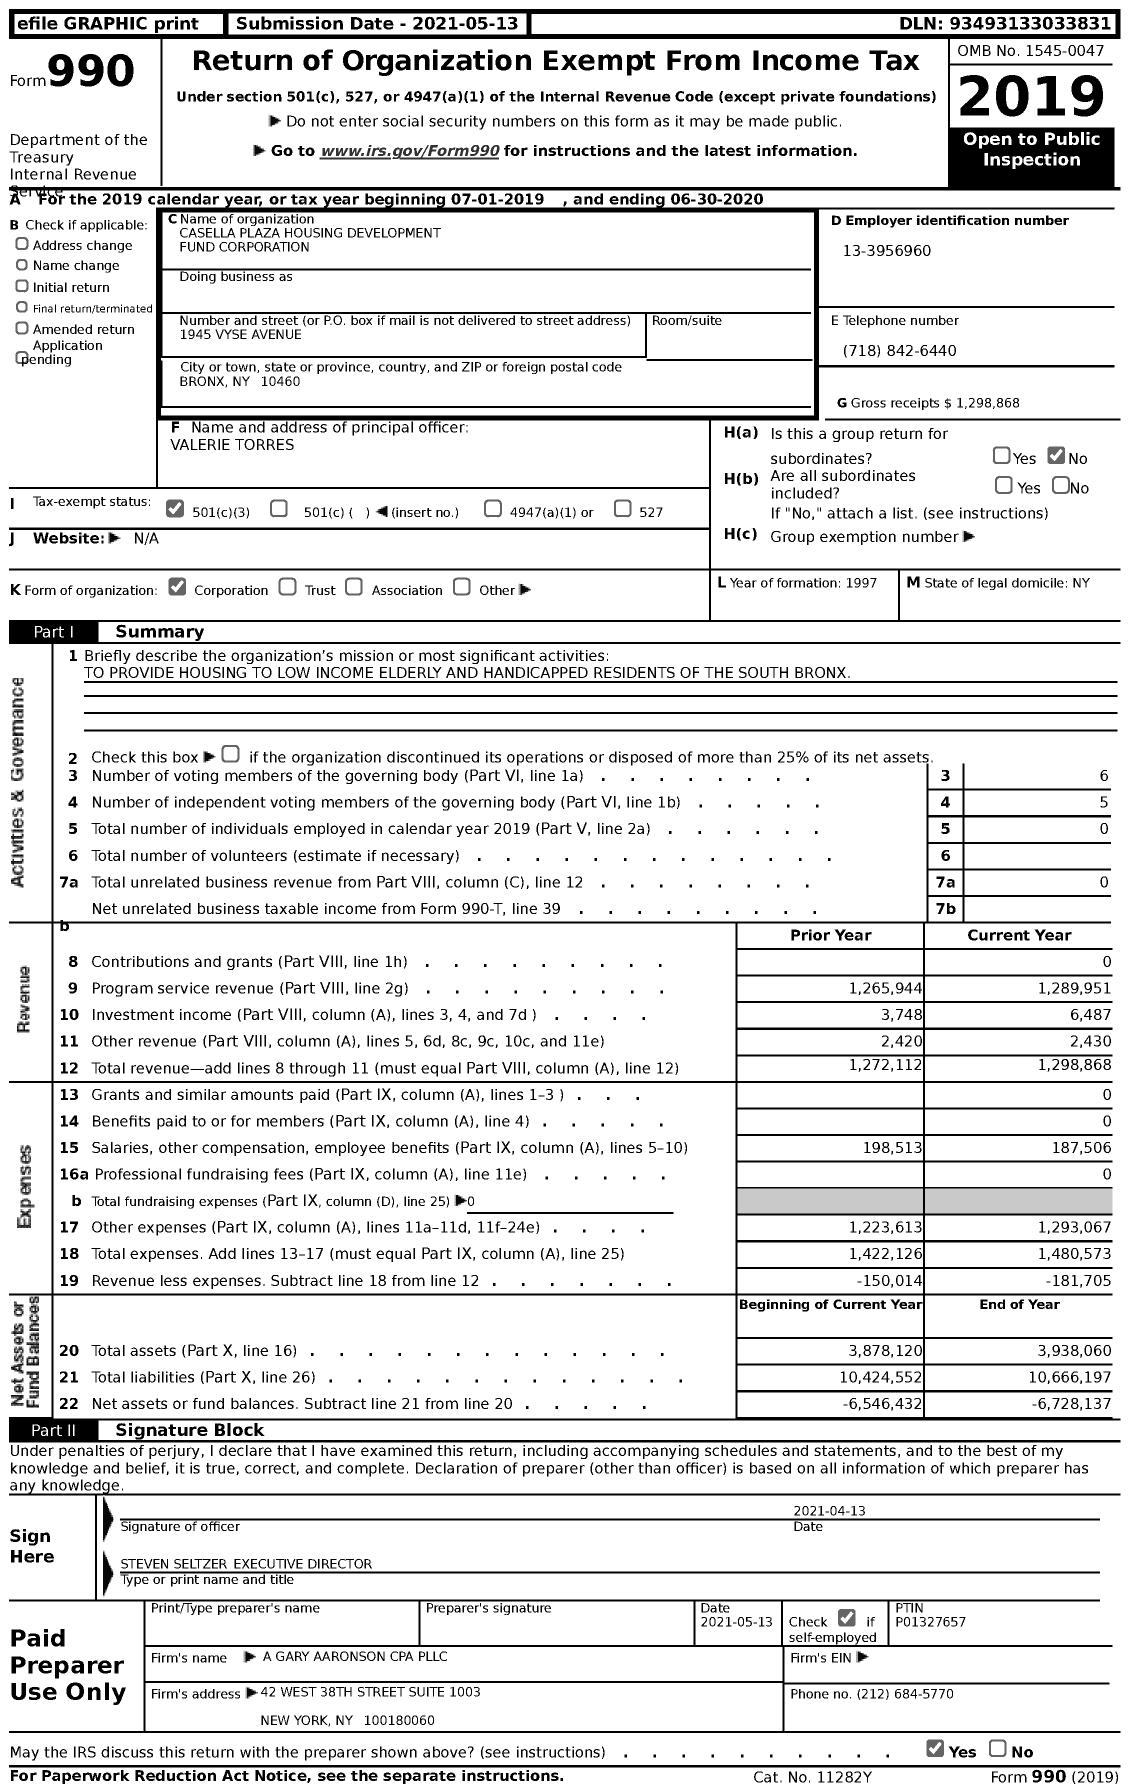 Image of first page of 2019 Form 990 for Casella Plaza Housing Development Fund Corporation